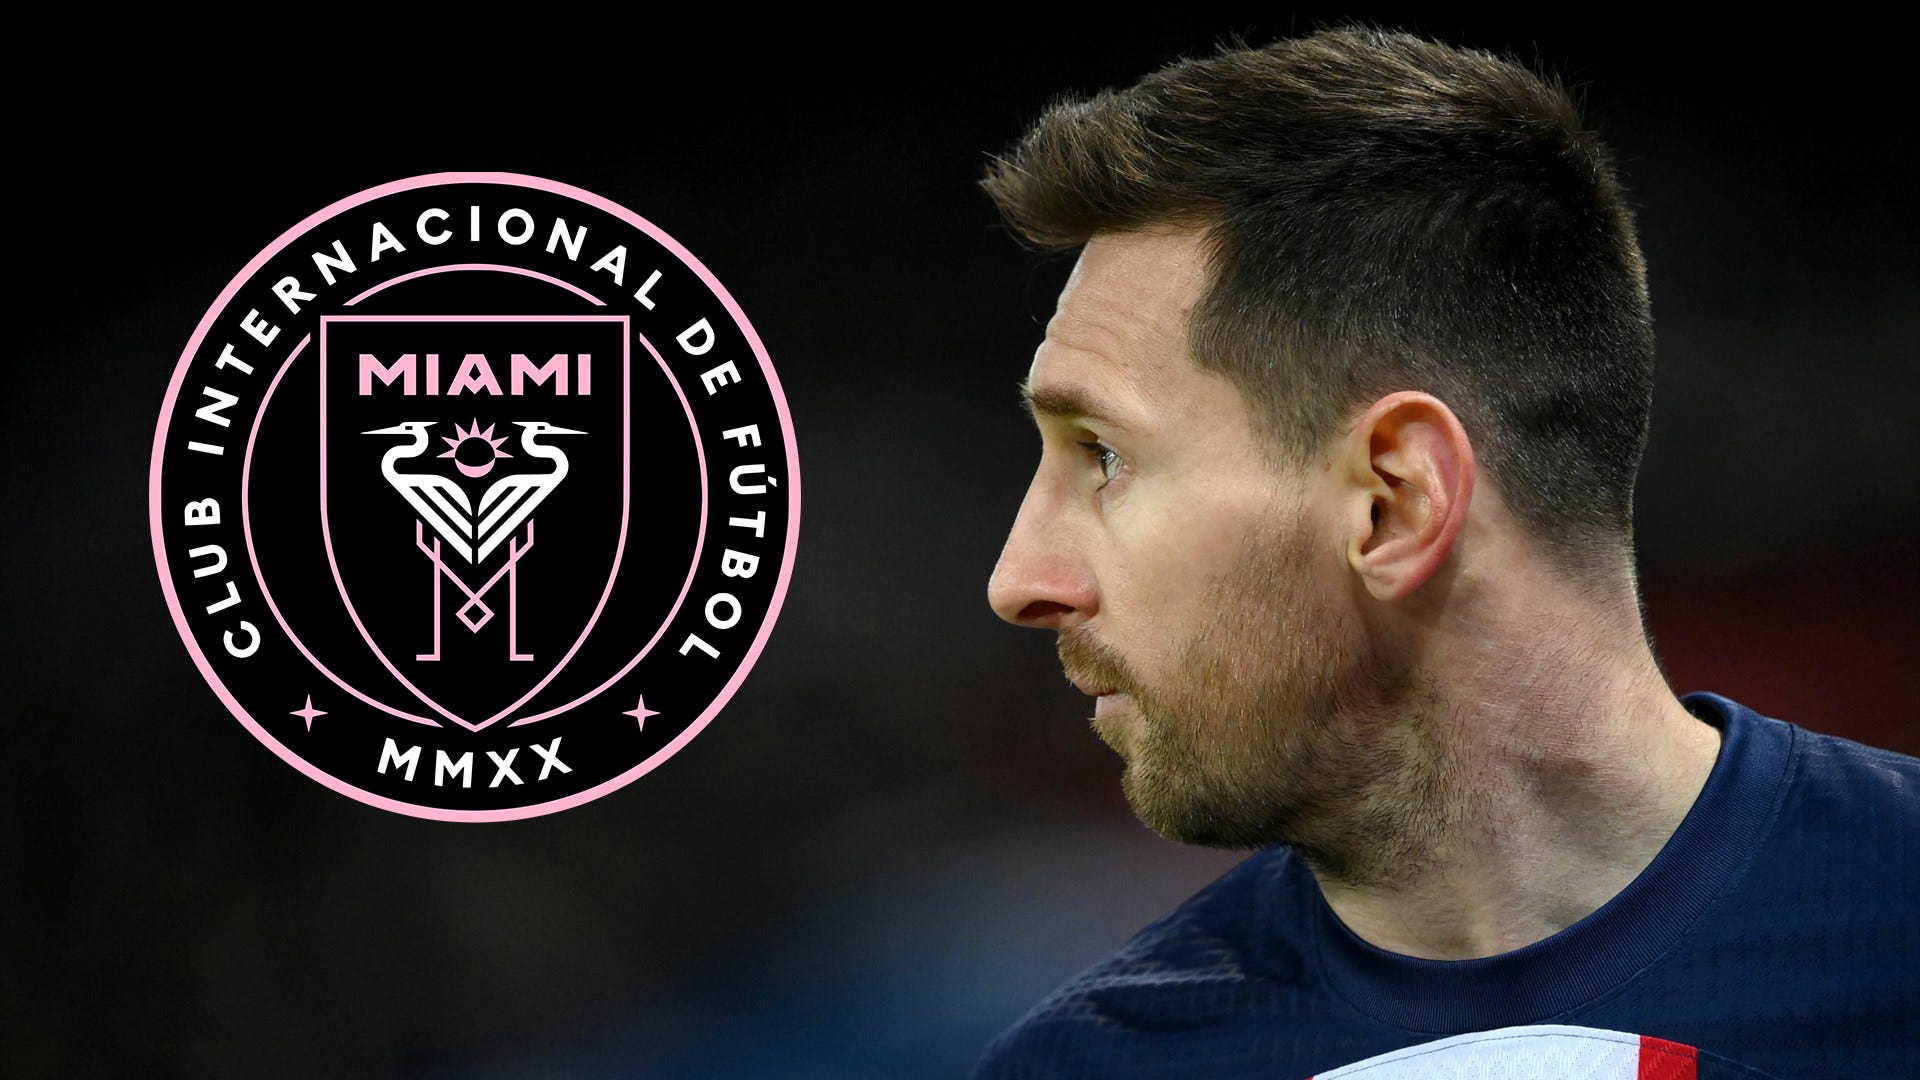 Lionel Messi is Inter Miami's transfer priority as owner Jorge Mas spends time with PSG star's entourage & $2.5 BILLION MLS broadcast deal could help fund move